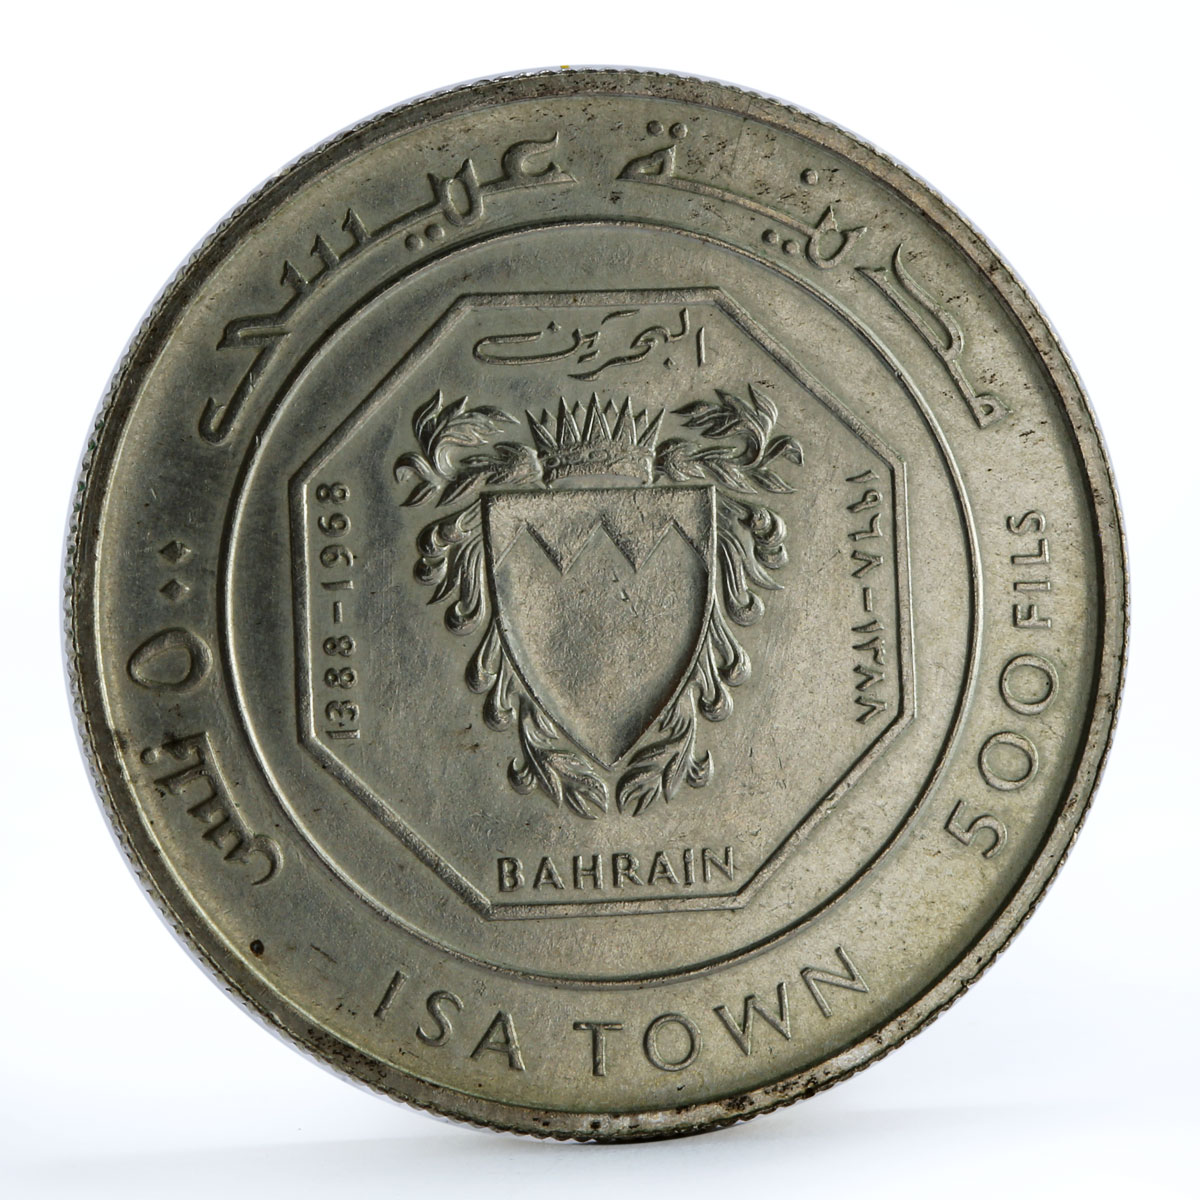 Bahrain 500 fils The Opening of Isa Town silver coin 1968